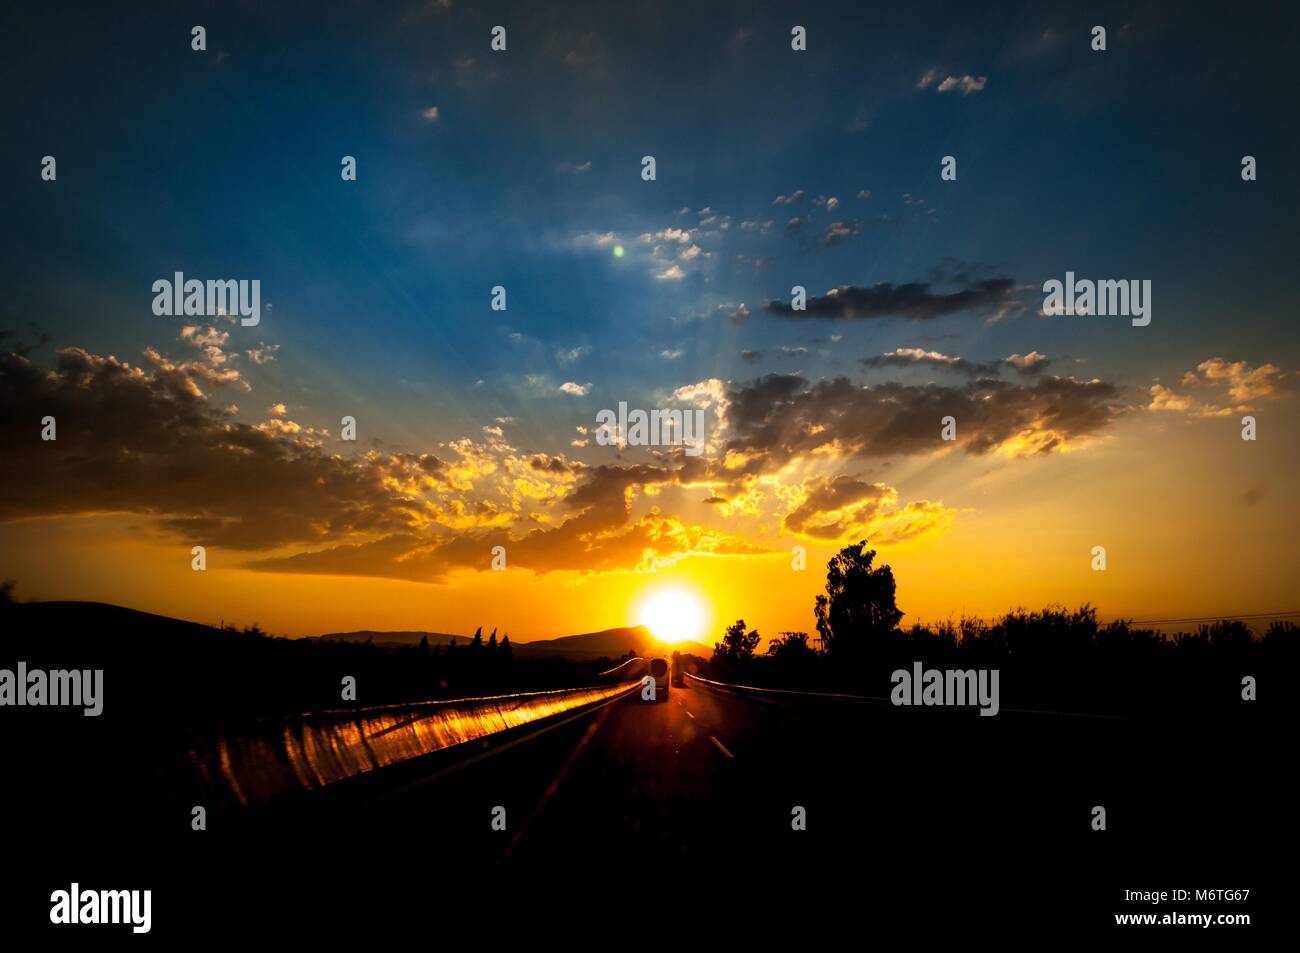 Colorful sunset over at highway. Landscape with orange sunset over highway. Cloud layers with sunrays between them. Contre-jour silhouette of cars. Stock Photo